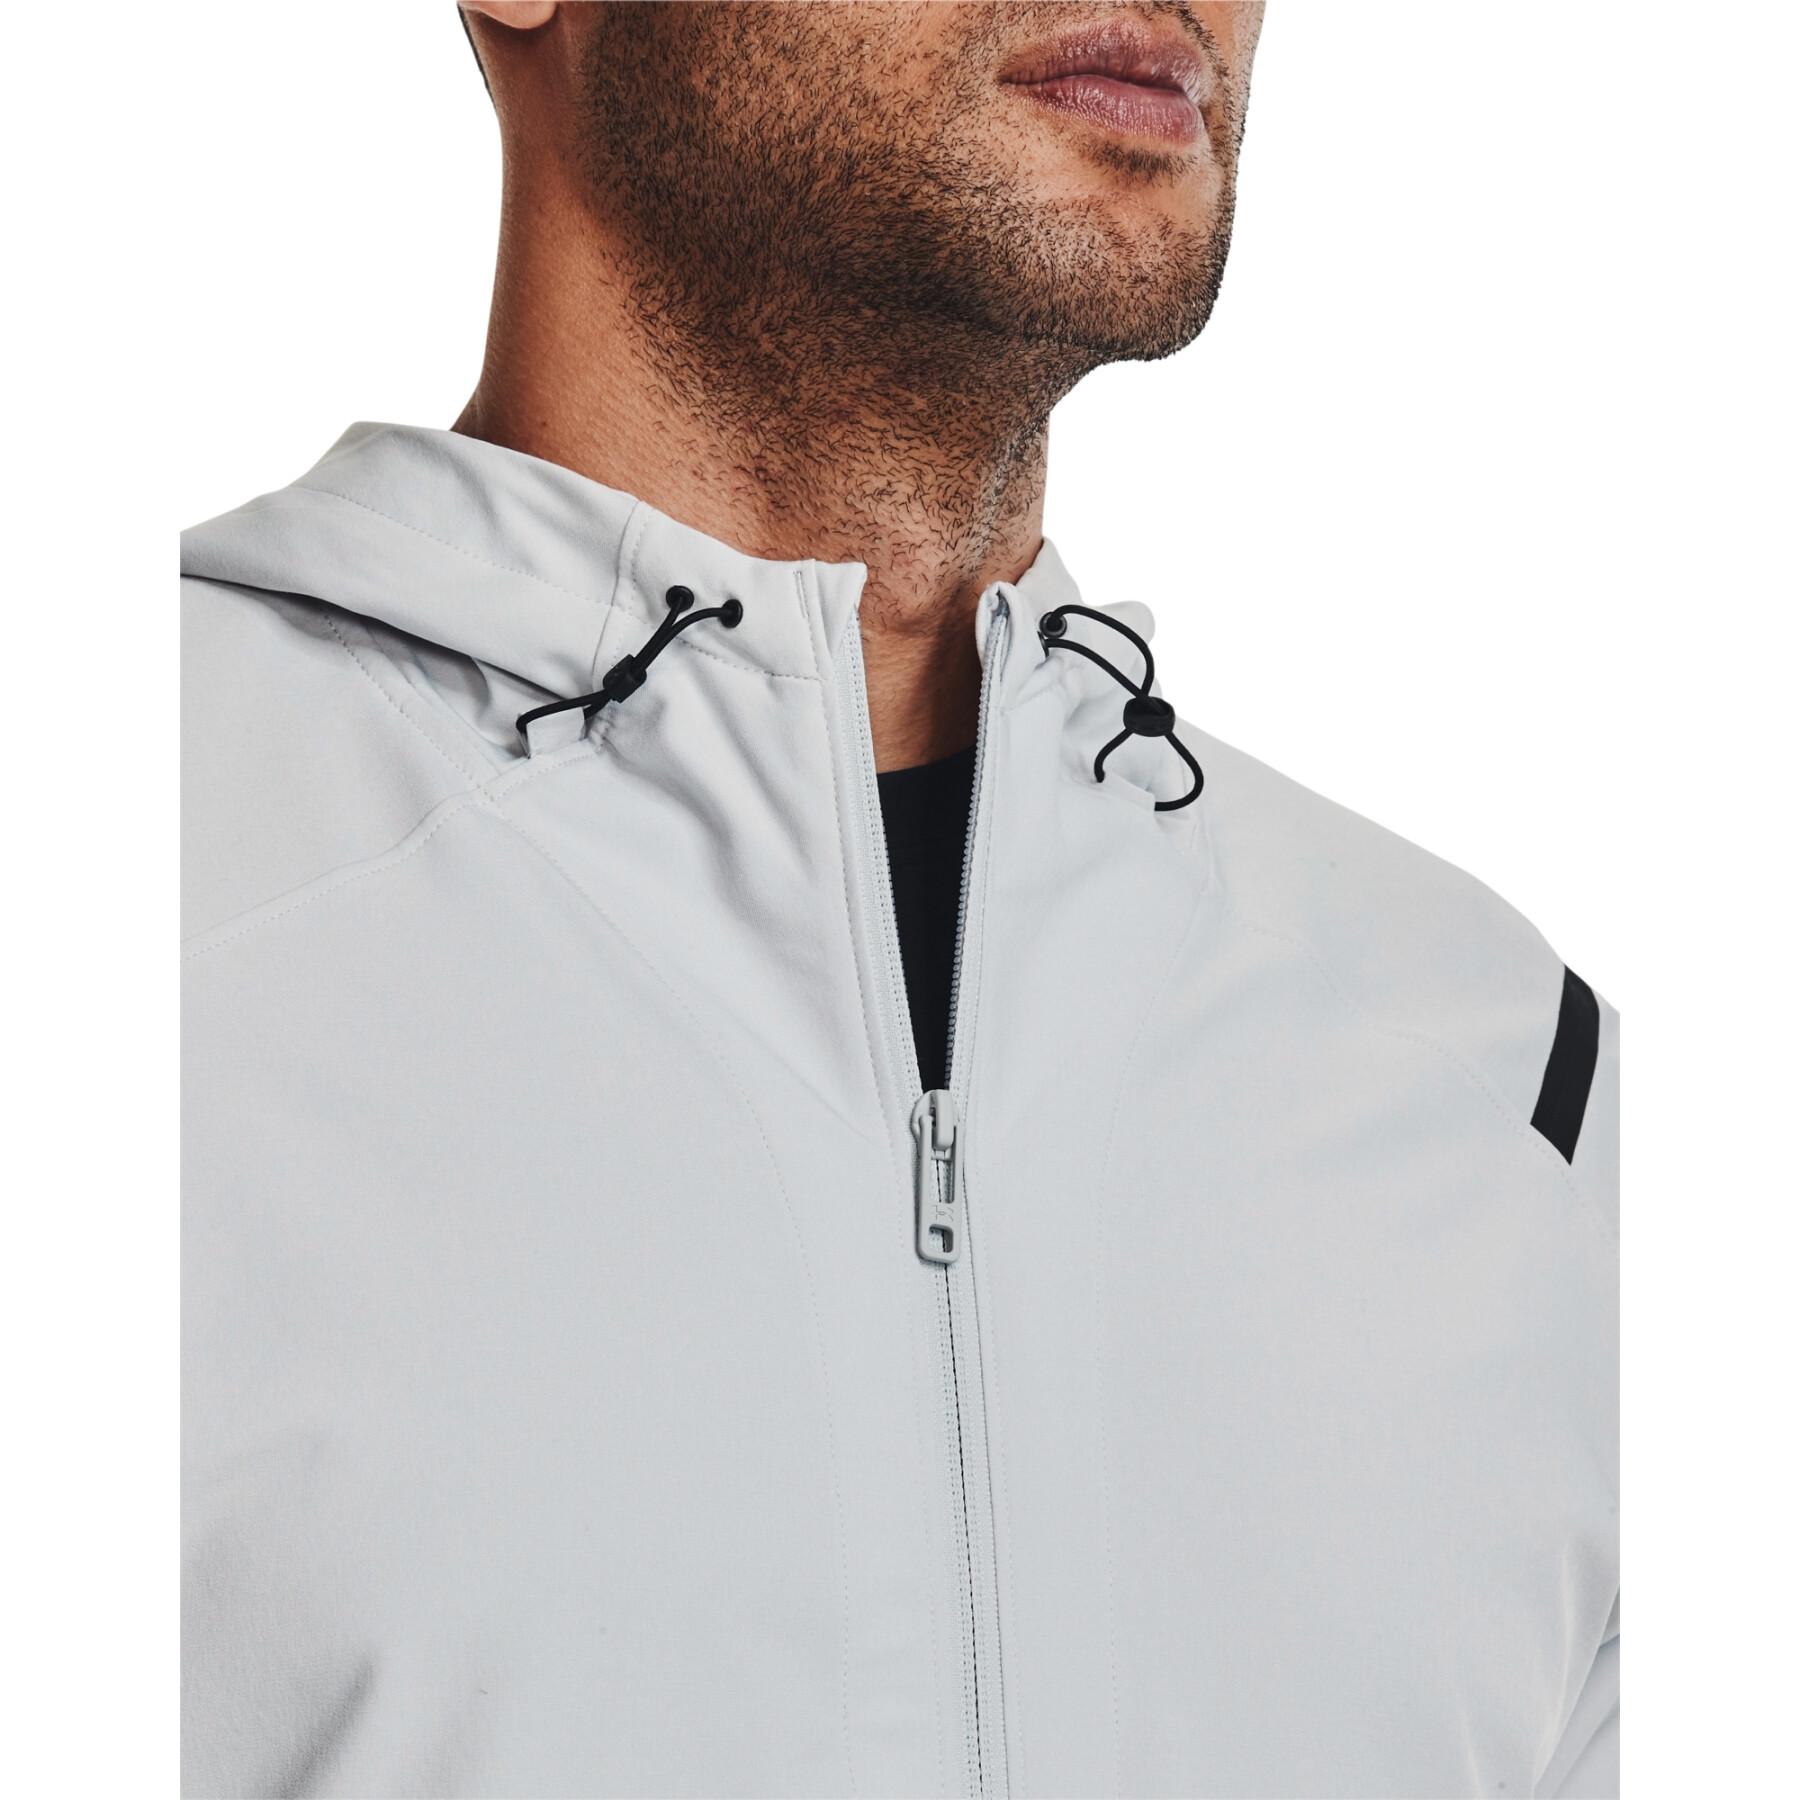 Unstoppable waterproof jacket Under Armour